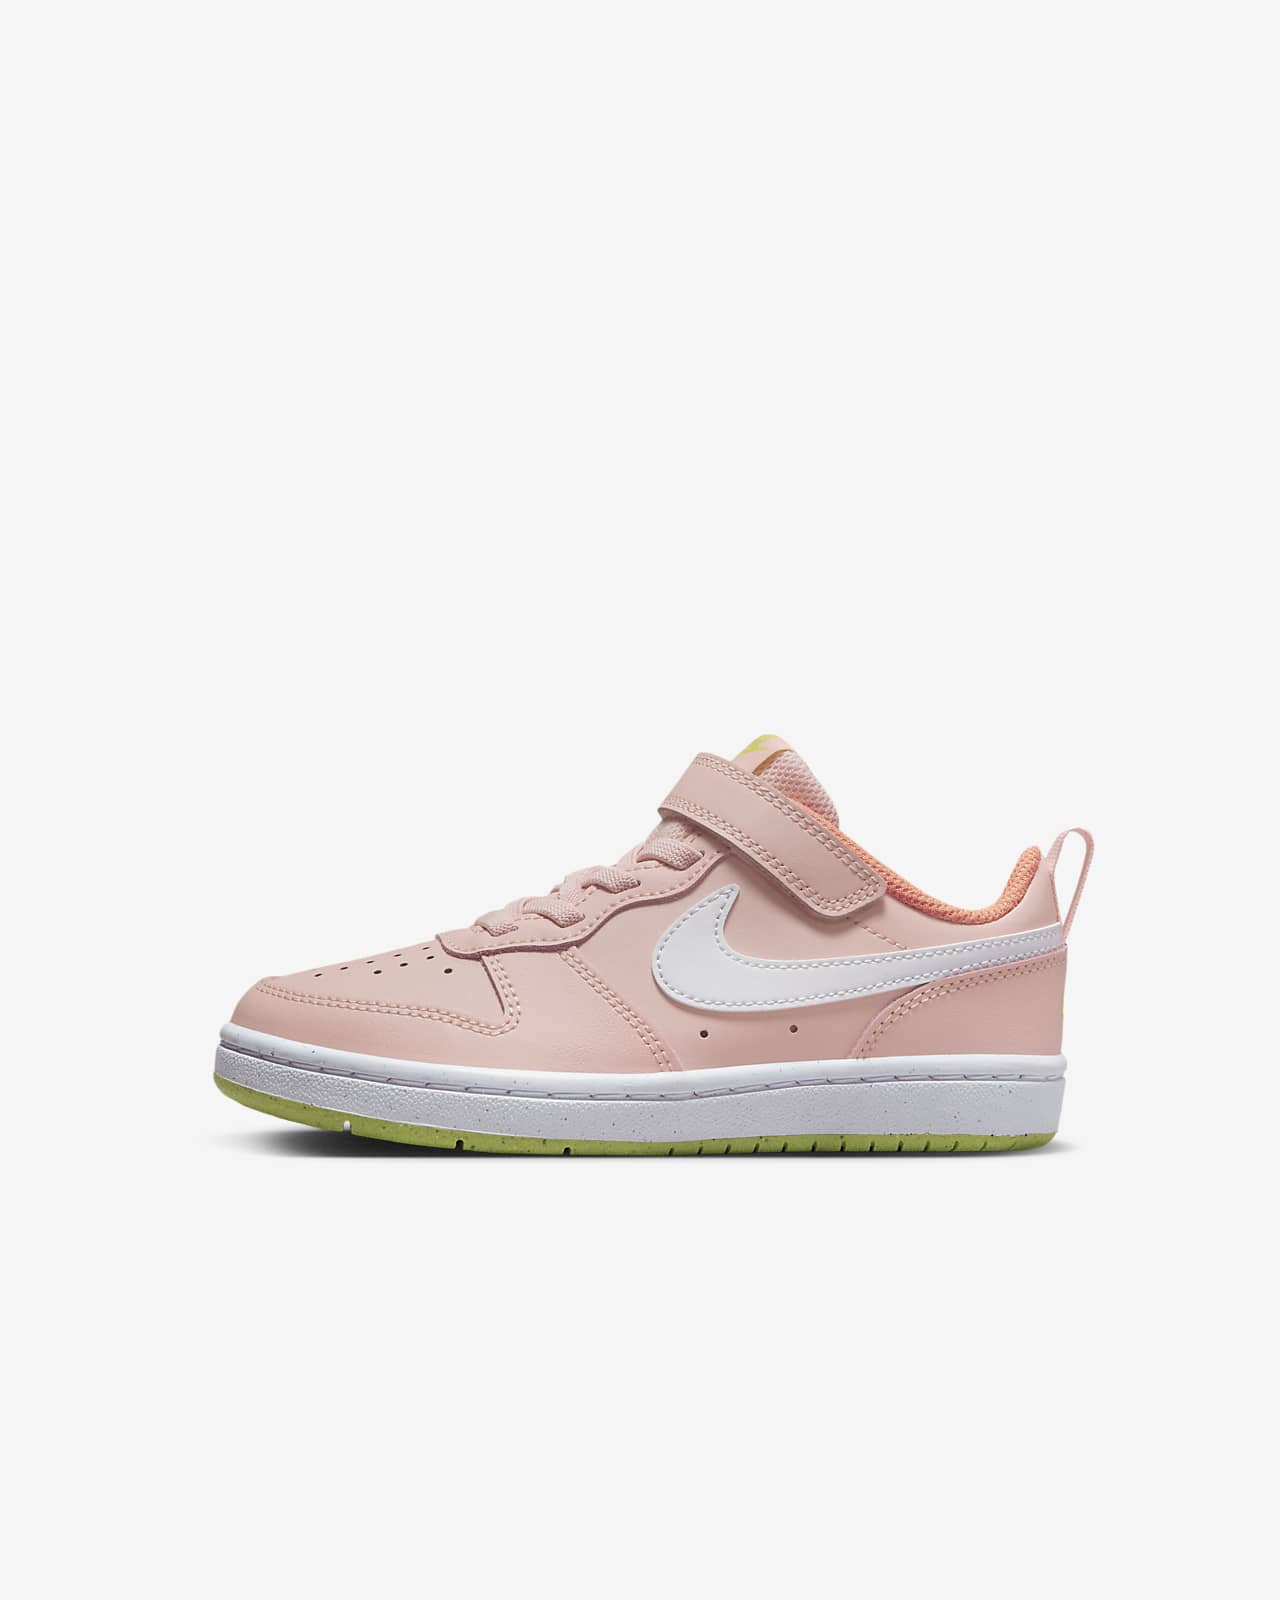 Nike Court Borough Low 2 Younger Kids' Shoes. ID